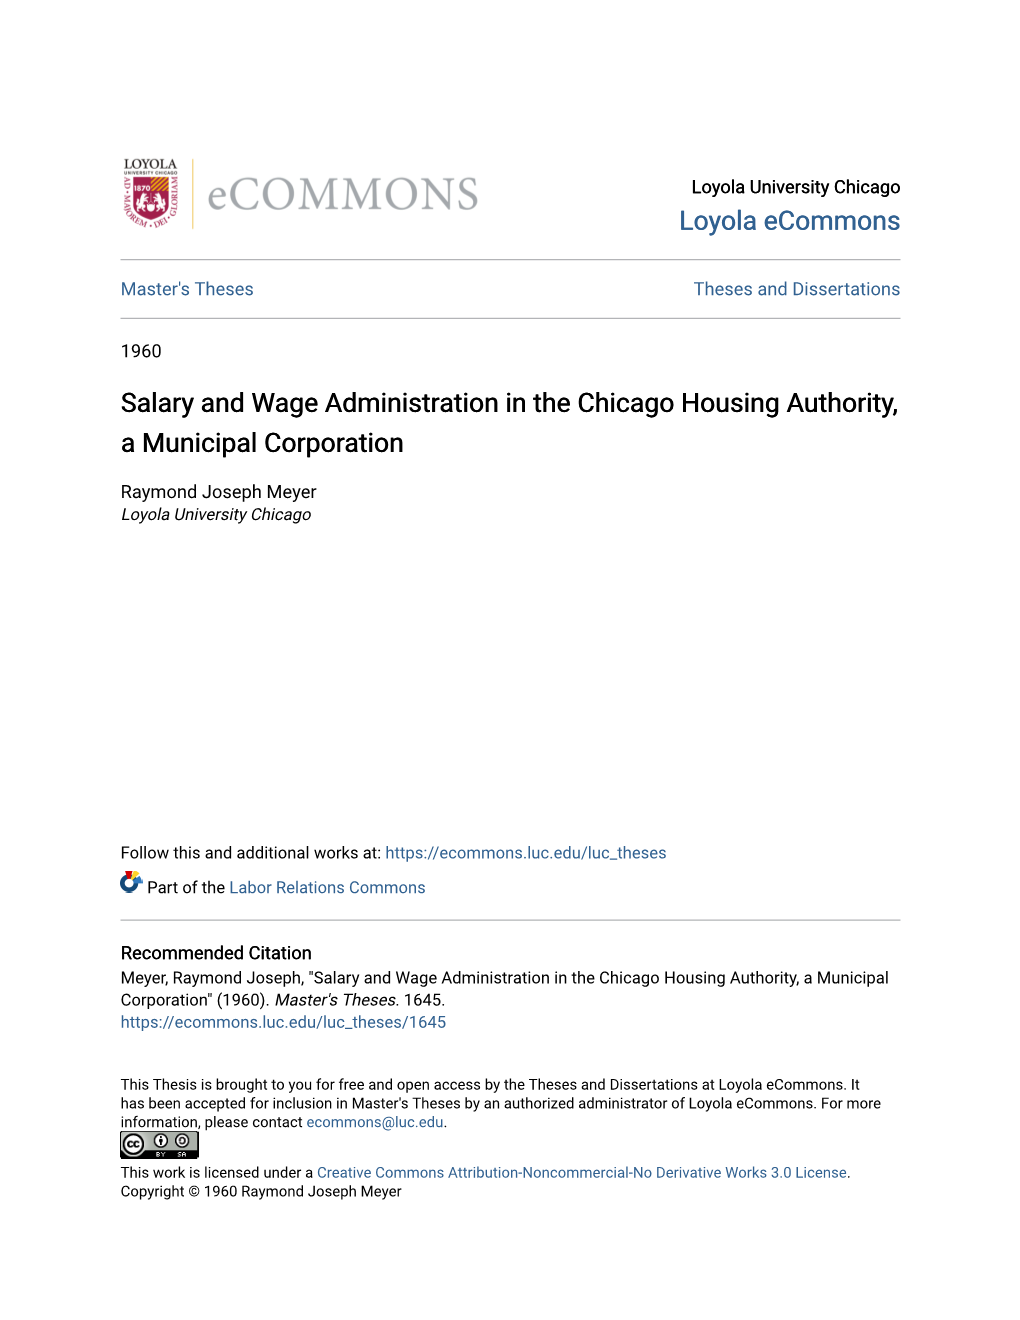 Salary and Wage Administration in the Chicago Housing Authority, a Municipal Corporation